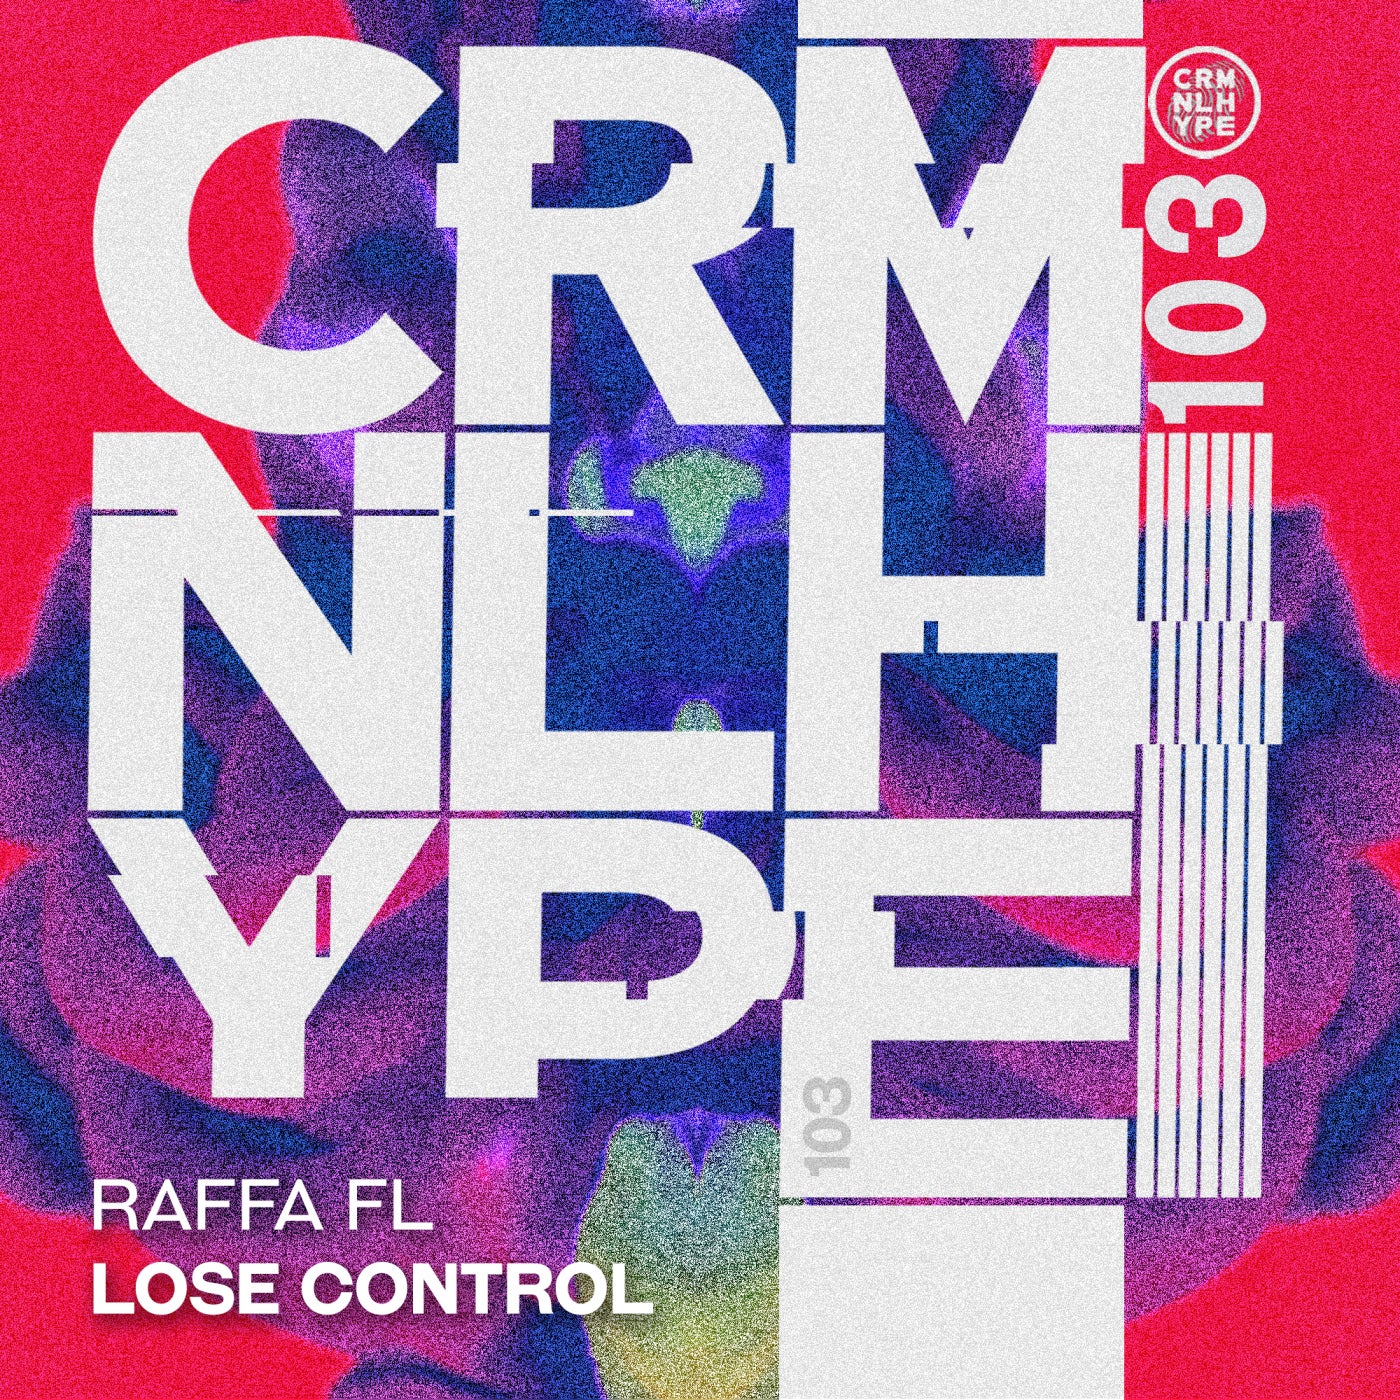 Download Lose Control on Electrobuzz